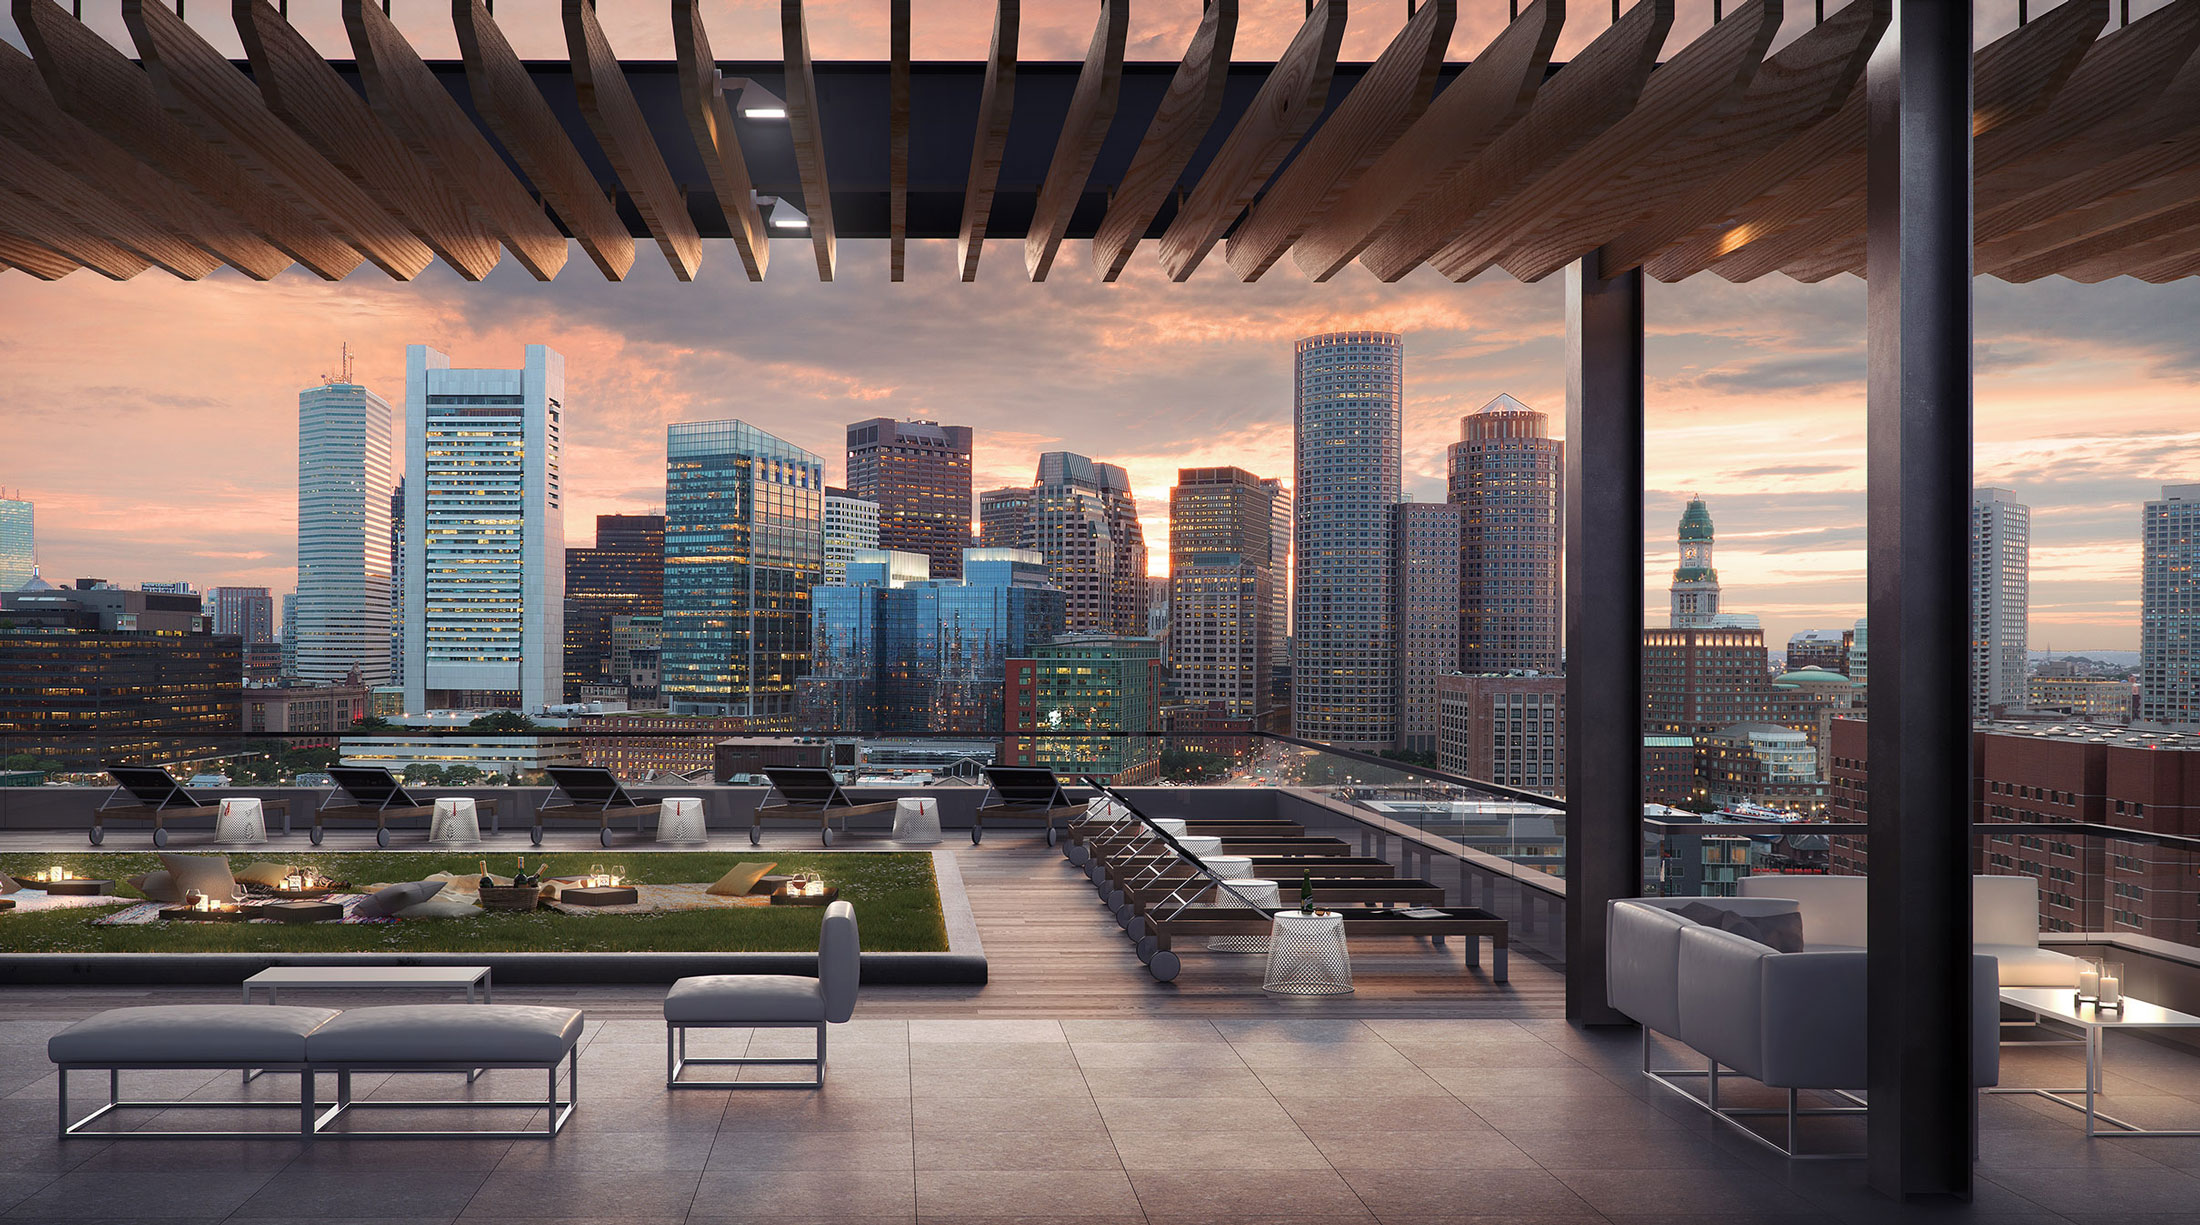 Architectural Rendering of the terrace of the Watermark Seaport project located in Boston, Massachusetts